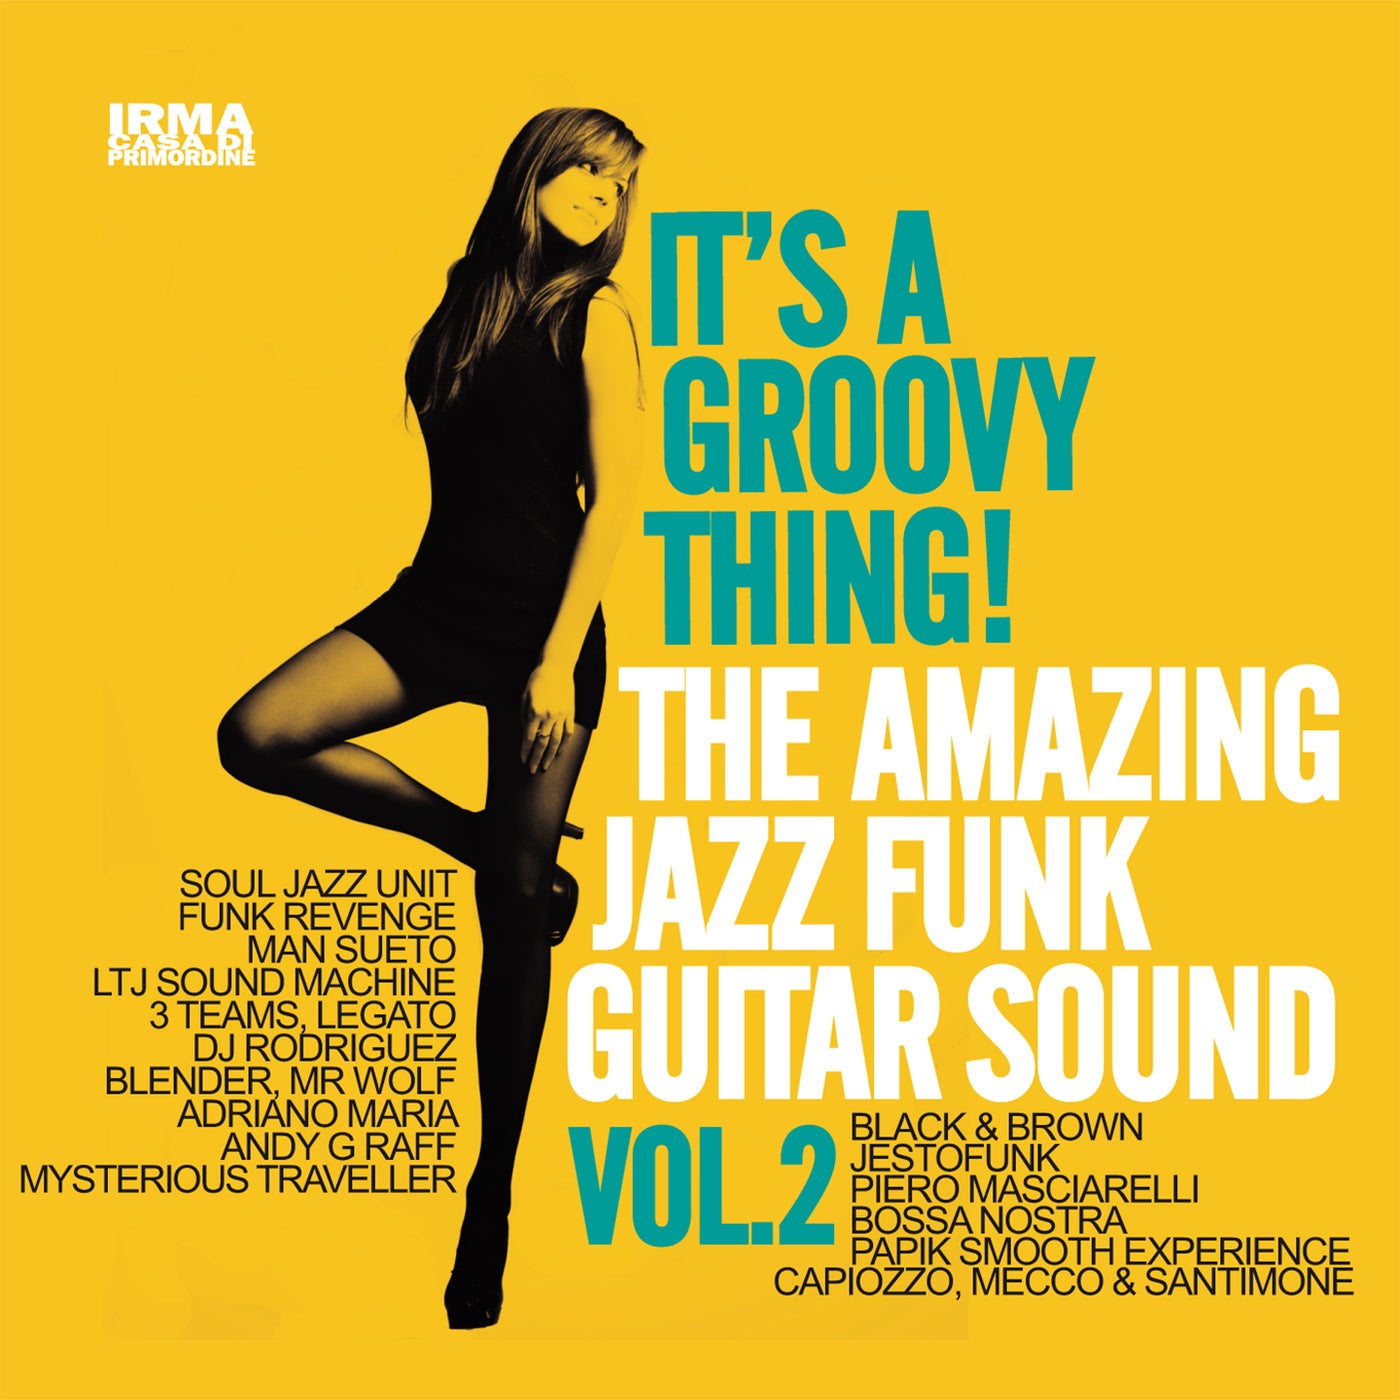 It's a Groovy Thing! Vol. 2 - The Amazing Jazz Funk Guitar Sound